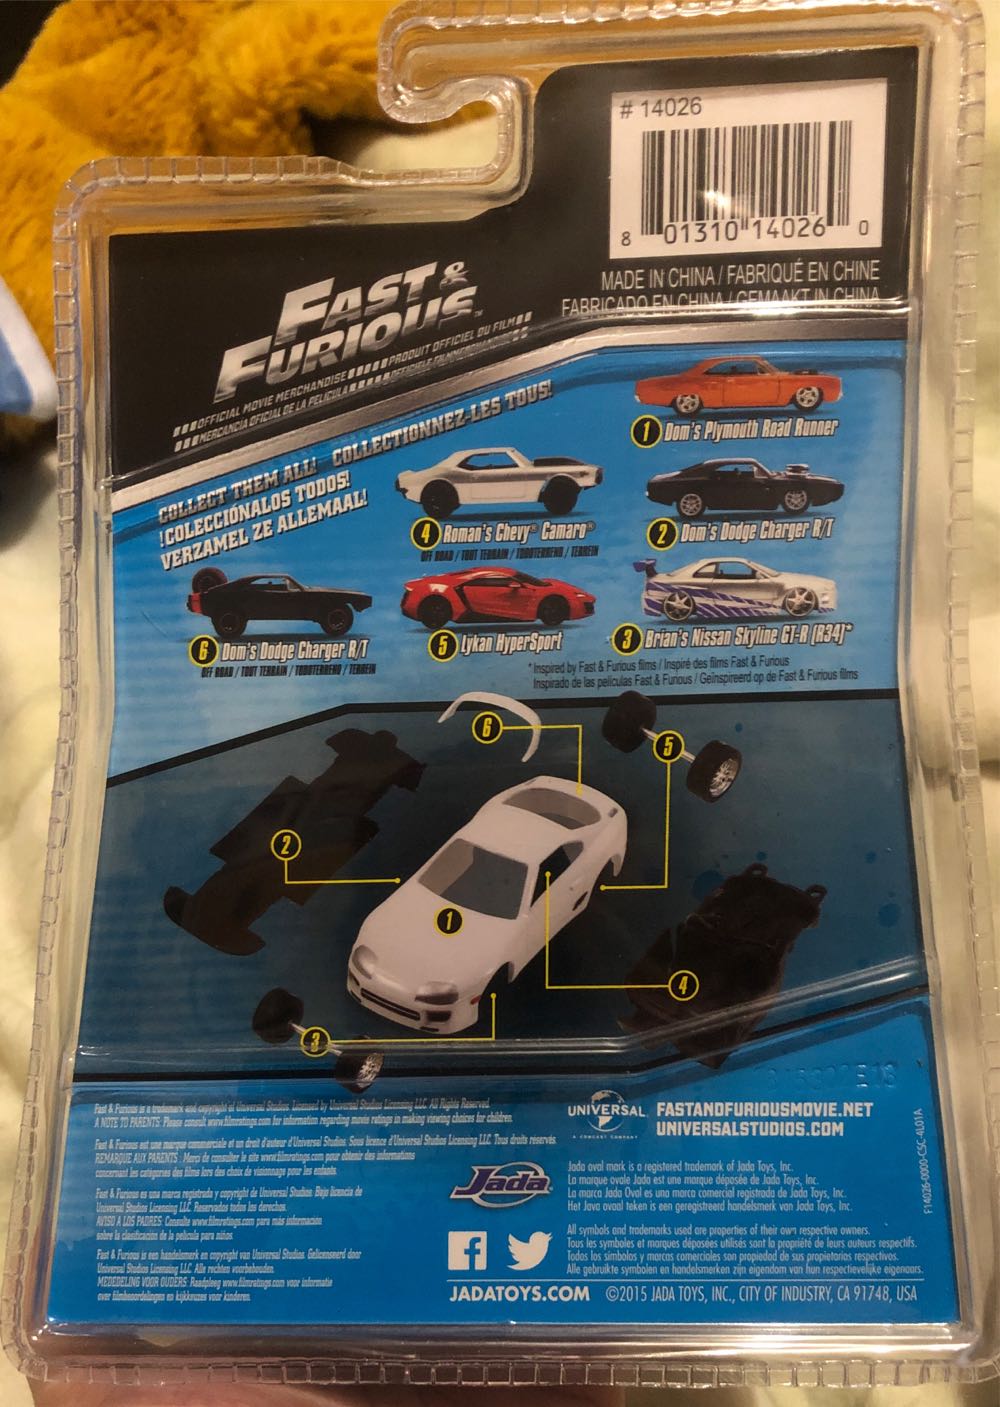 Brian’s 1999 Nissan Skyline GT-R - 2015 Greenlight Hollywood Series 10 toy car collectible - Main Image 2